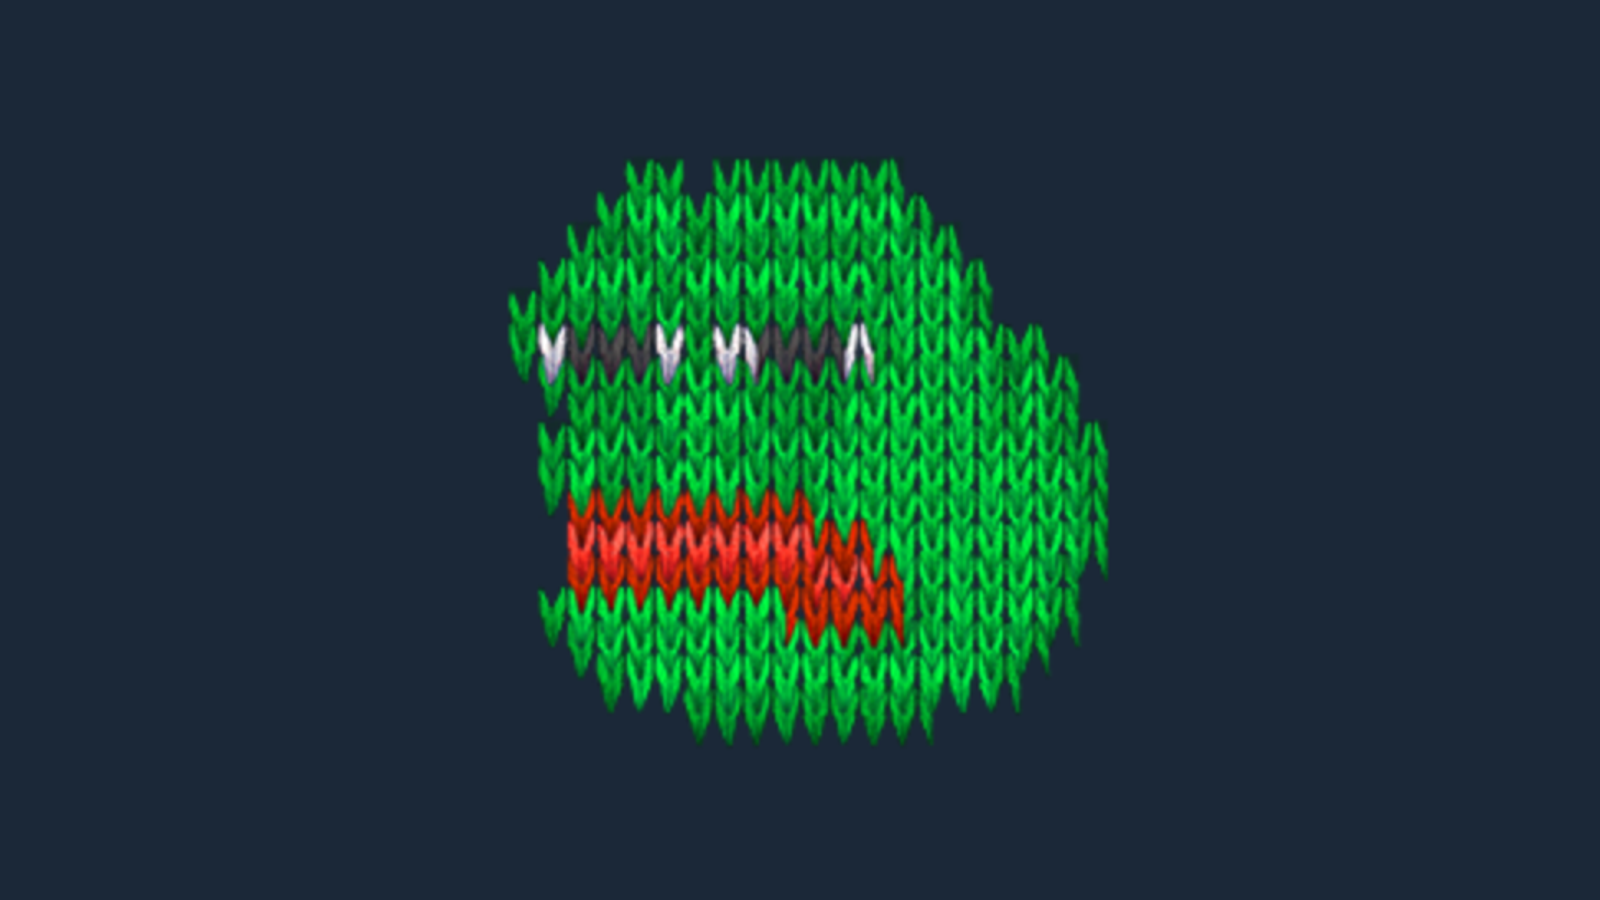 Steam Purged Of Pepe Emoticons After Creator Files Copyright Claim